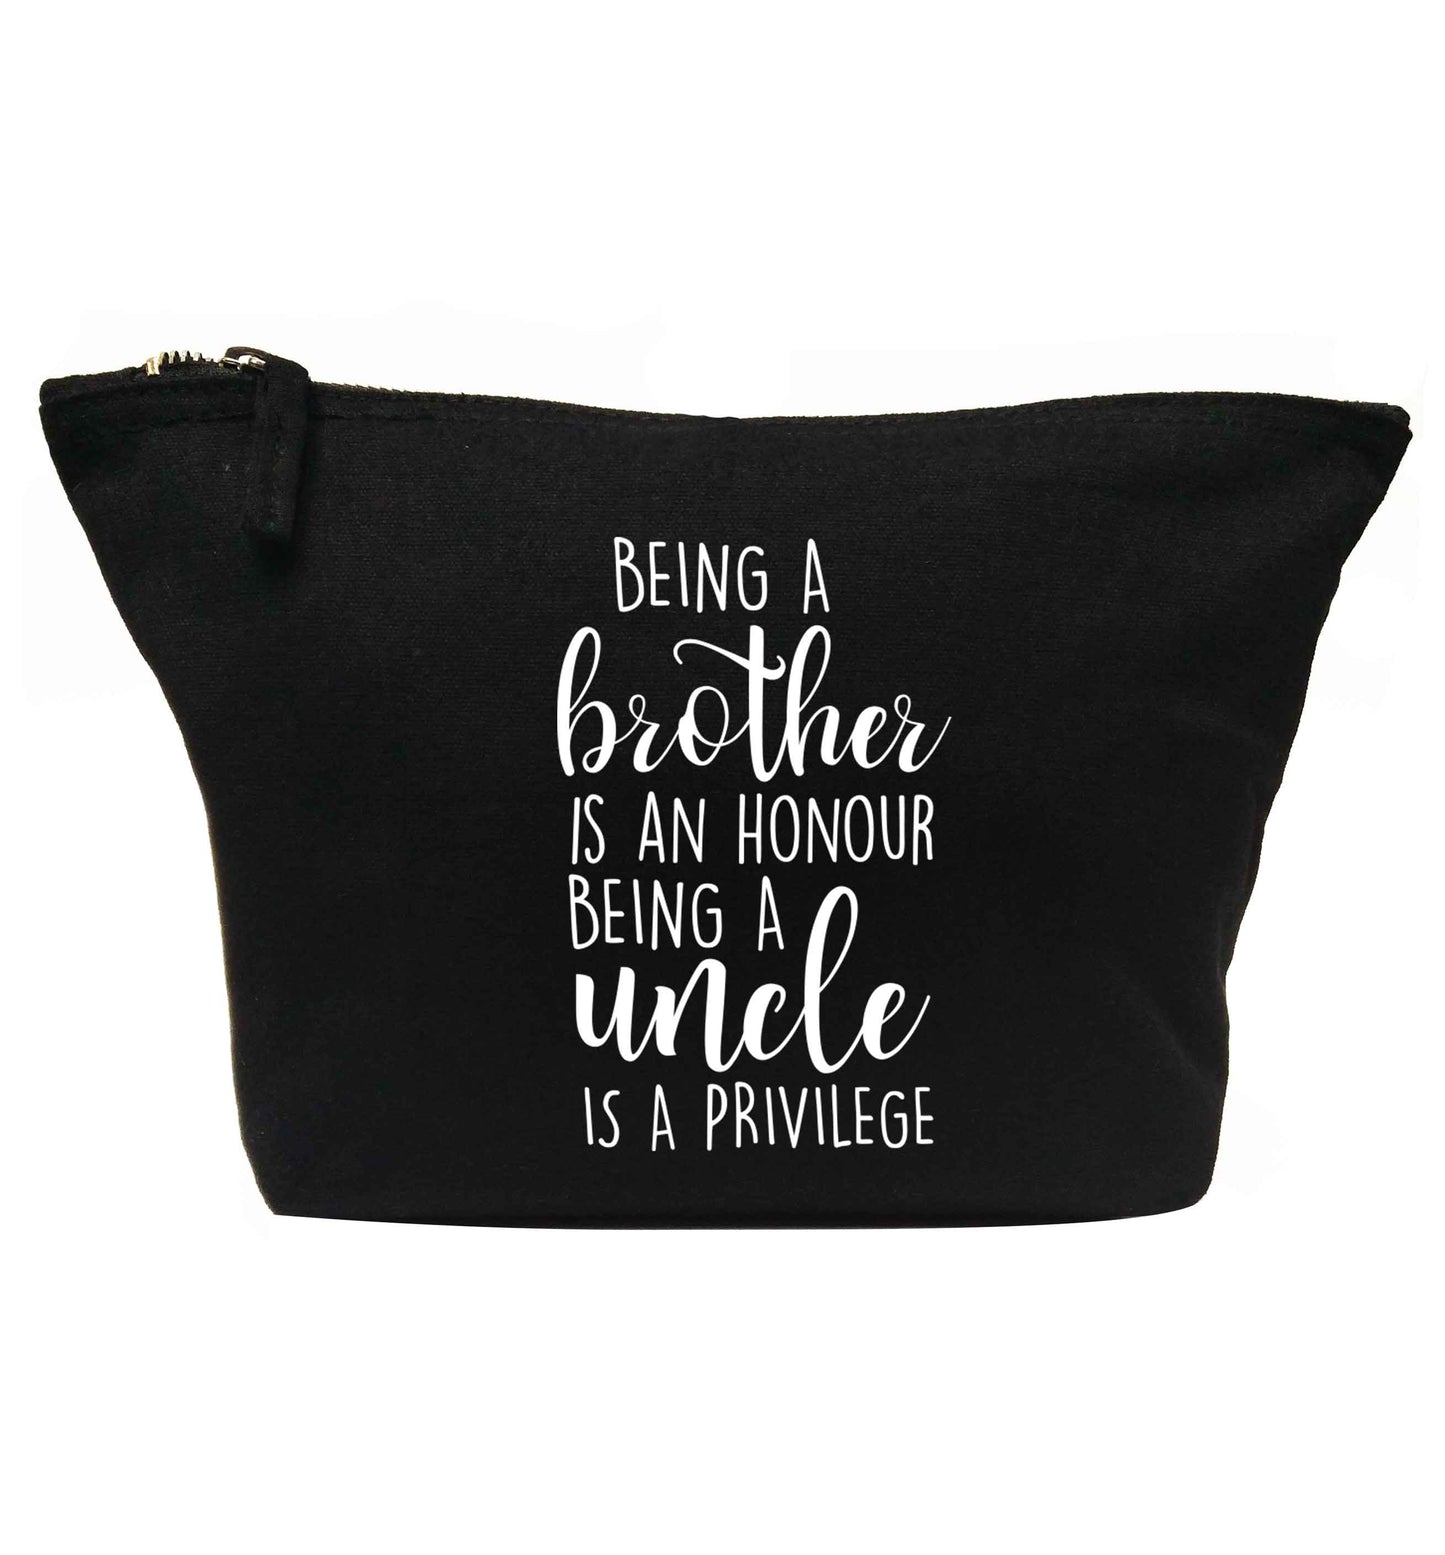 Being a brother is an honour being an uncle is a privilege | makeup / wash bag